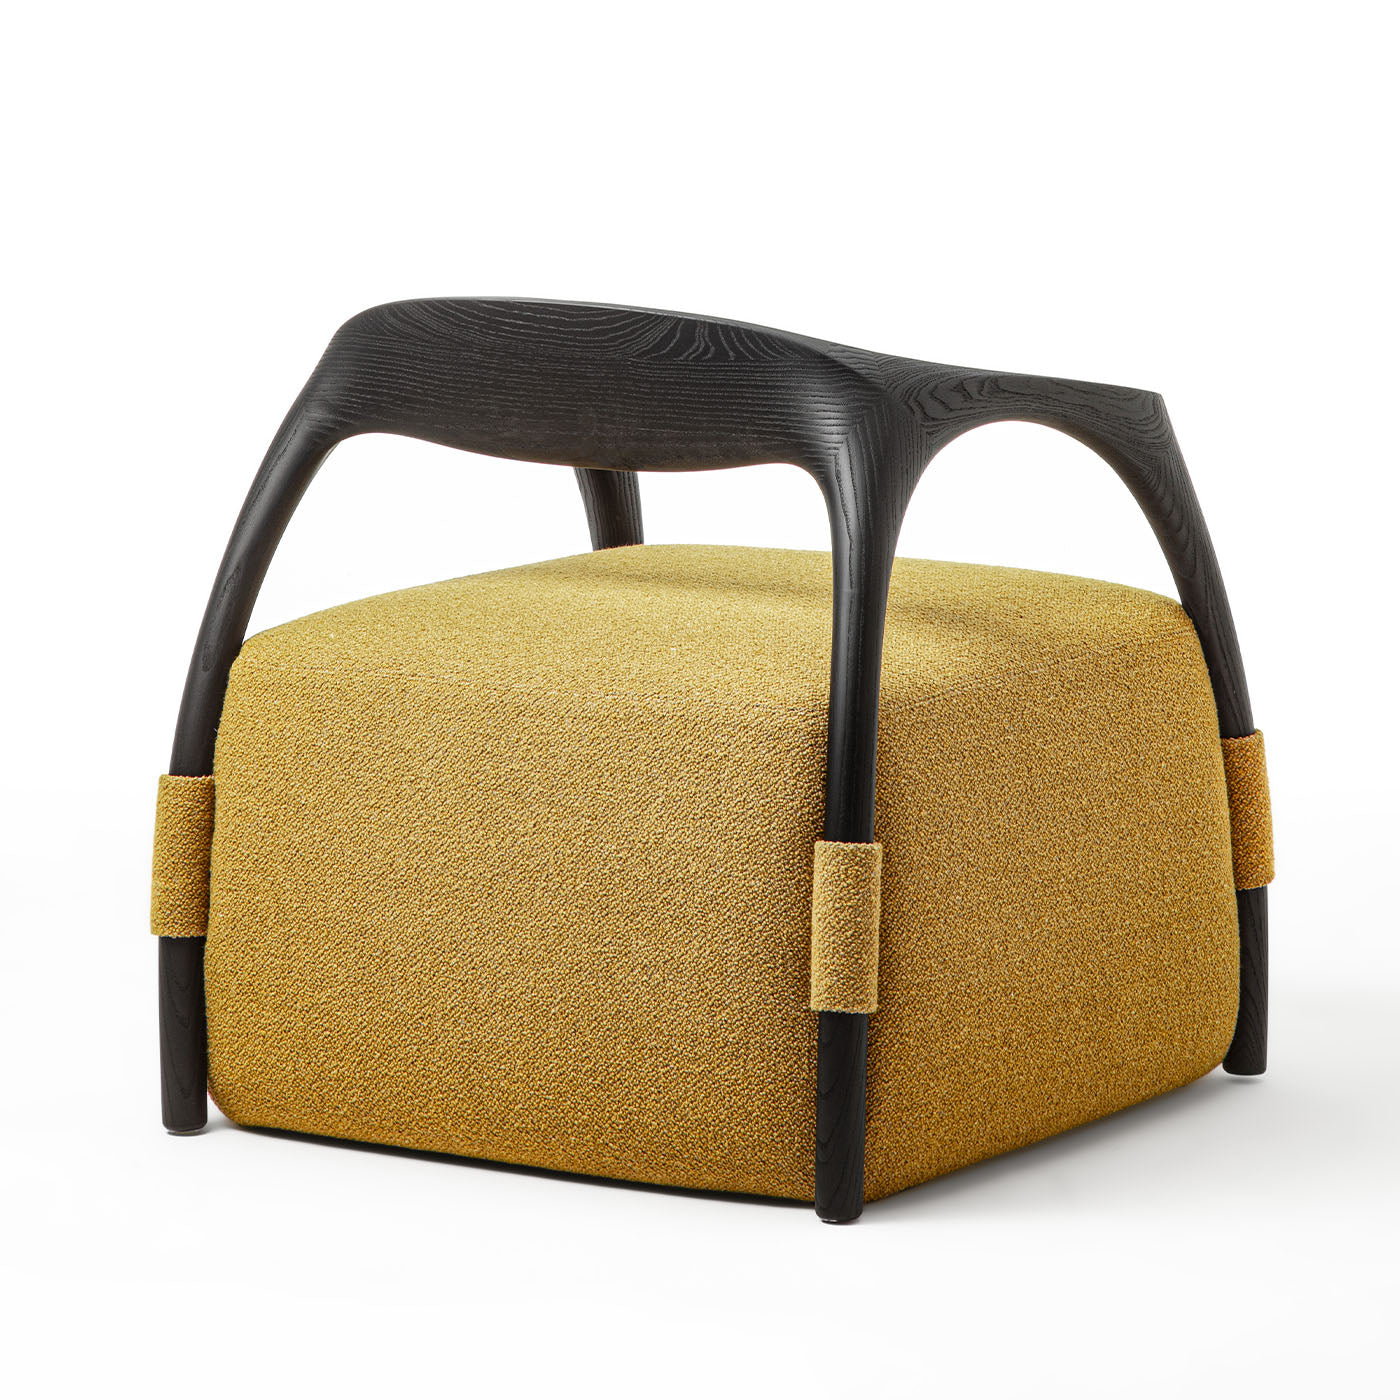 Chassis Black Ash Solid Wood Armchair & Yellow Fabric Upholstery - Alternative view 1